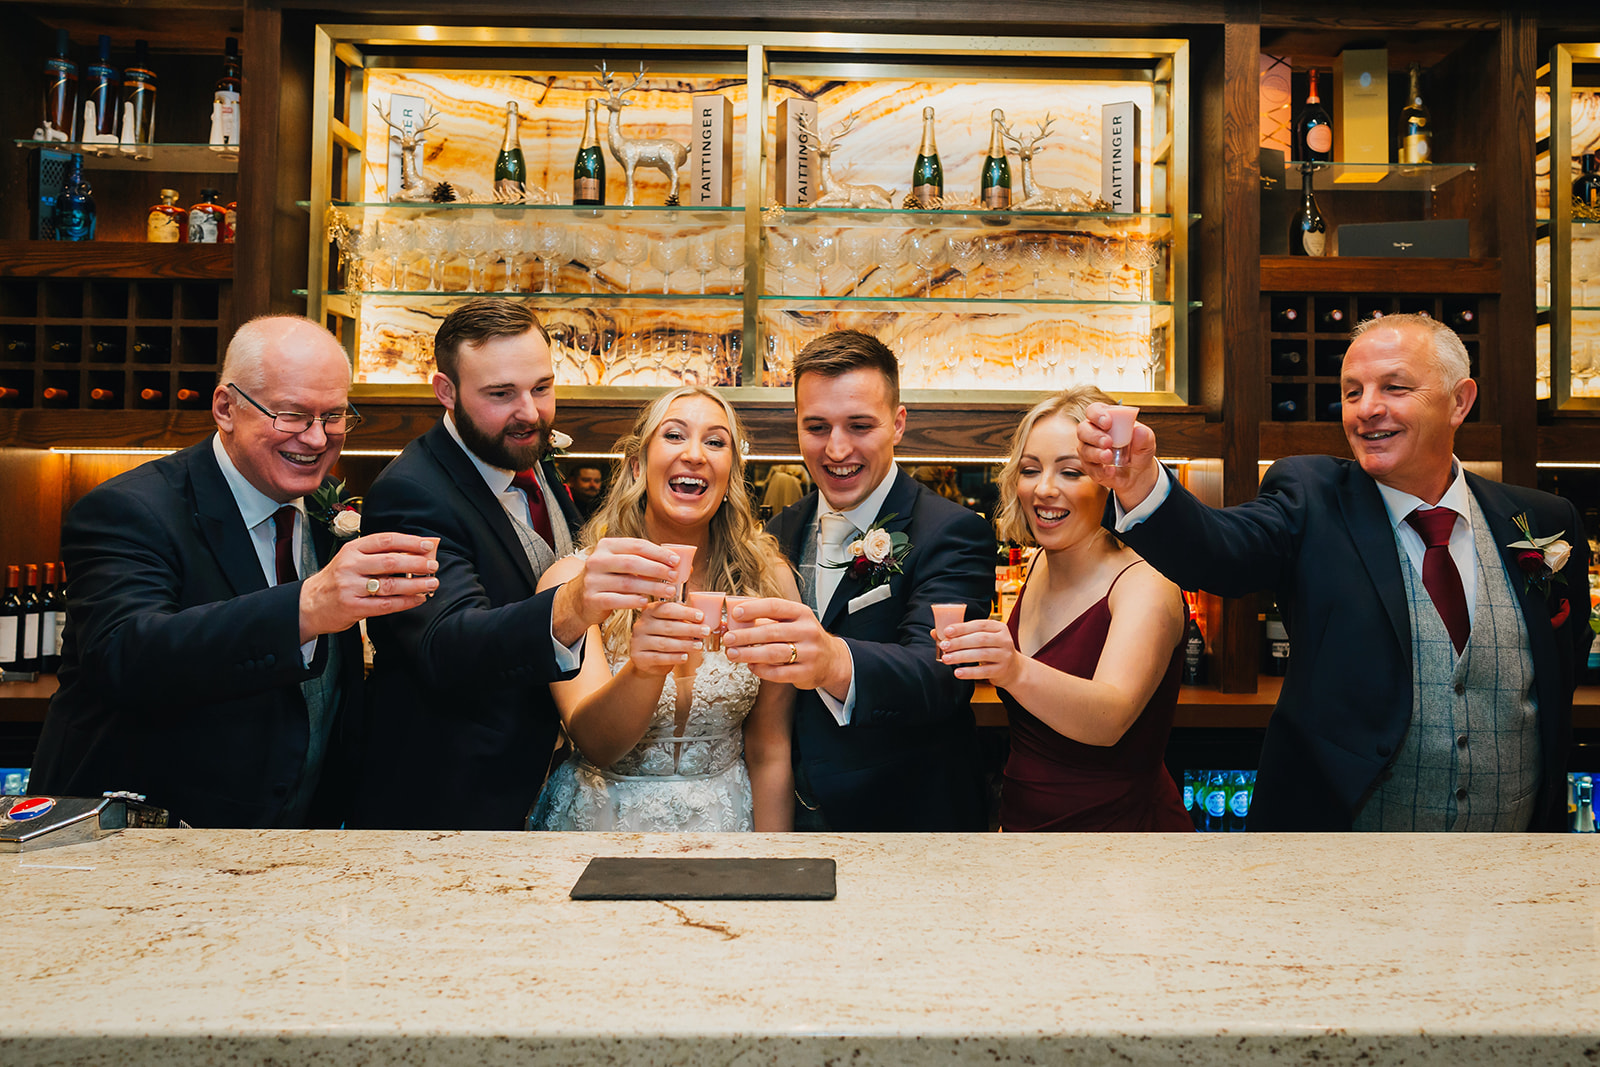 the bride, groom and their loved ones share a toast behind the bar